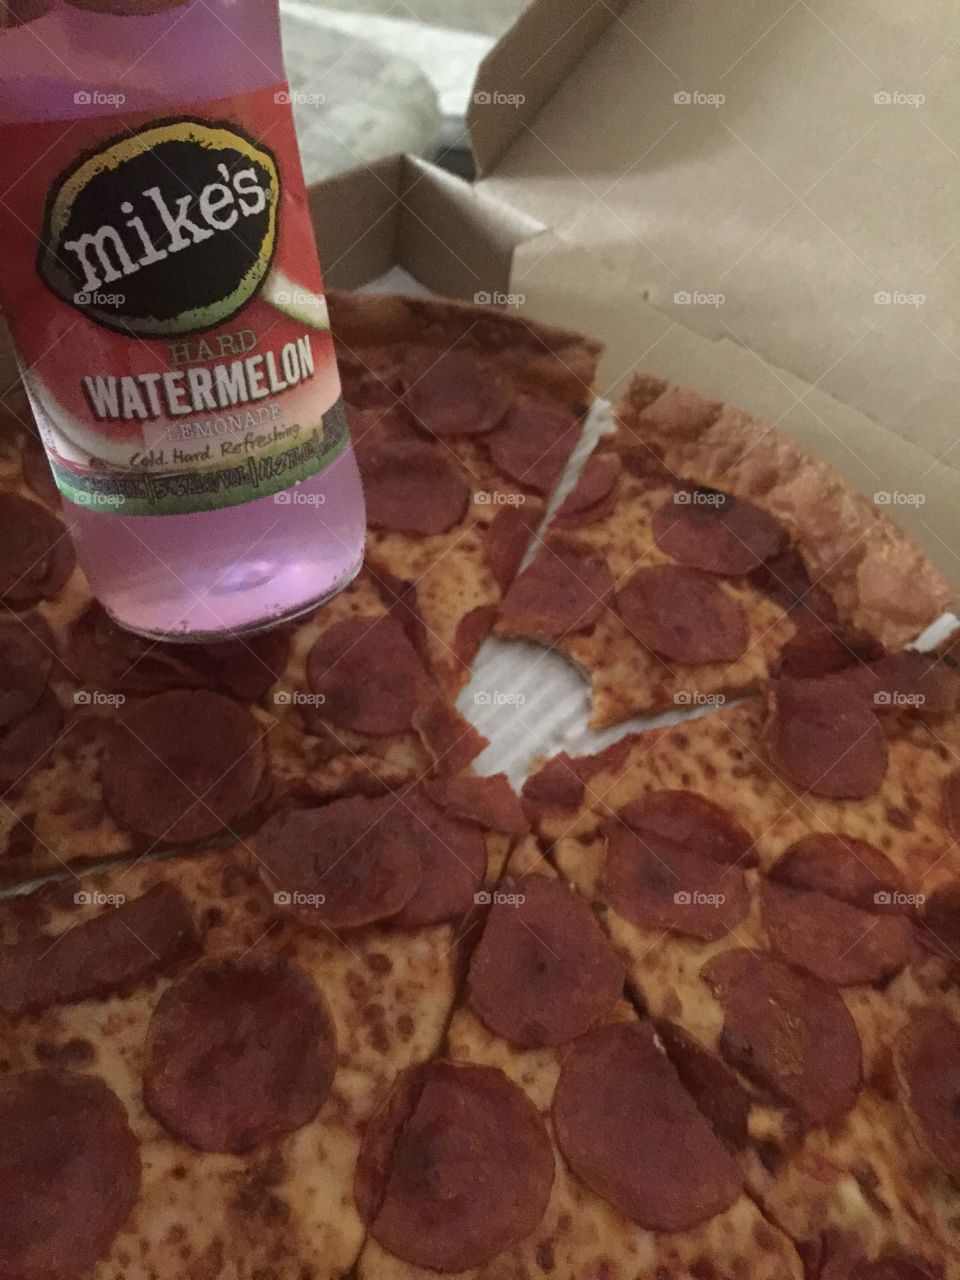 Enjoying a Mike’s hard watermelon lemonade with some delicious Pizza Hut Pizza! 